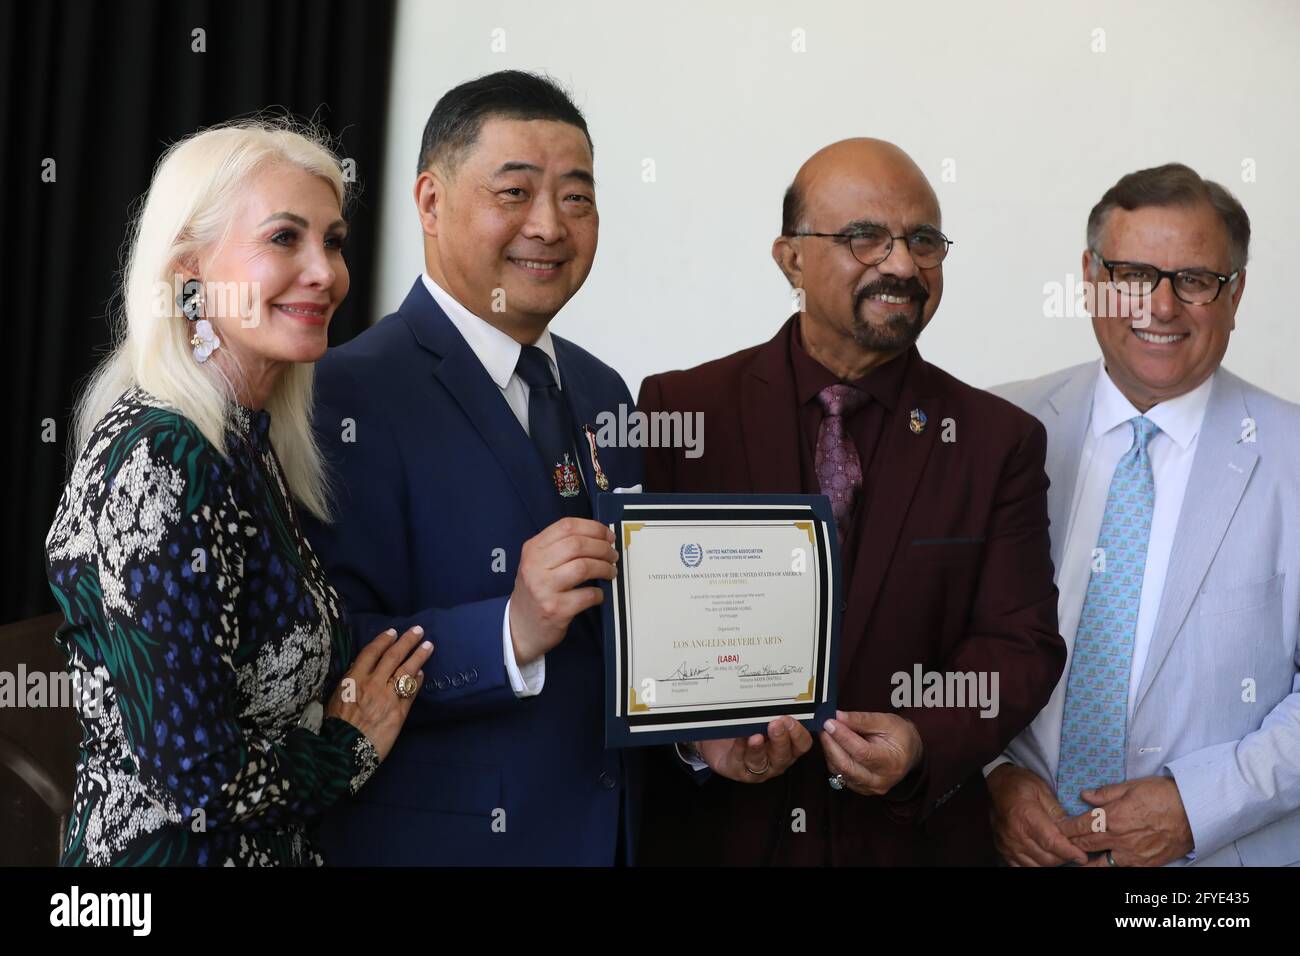 Beverly Hills, California, USA. 26th May, 2021. Princess Karen Cantrell, Joey Zhou, Ike Khamisani, President of the United Nations Association of the United States of America (UNA-USA), Inland Empire, and Carlos Amezcua with a certificate that was given to the Los Angeles Beverly Arts (LABA) from the UNA-USA, Inland Empire, at 'Inextricably Linked' The Art of Jiannan Huang - Vernissage, a private viewing event for artist Jiannan Huang at the Beverly Hilton Hotel in Beverly Hills, California. LABA was founded by TV host Joey Zhou.  Credit: Sheri Determan Stock Photo